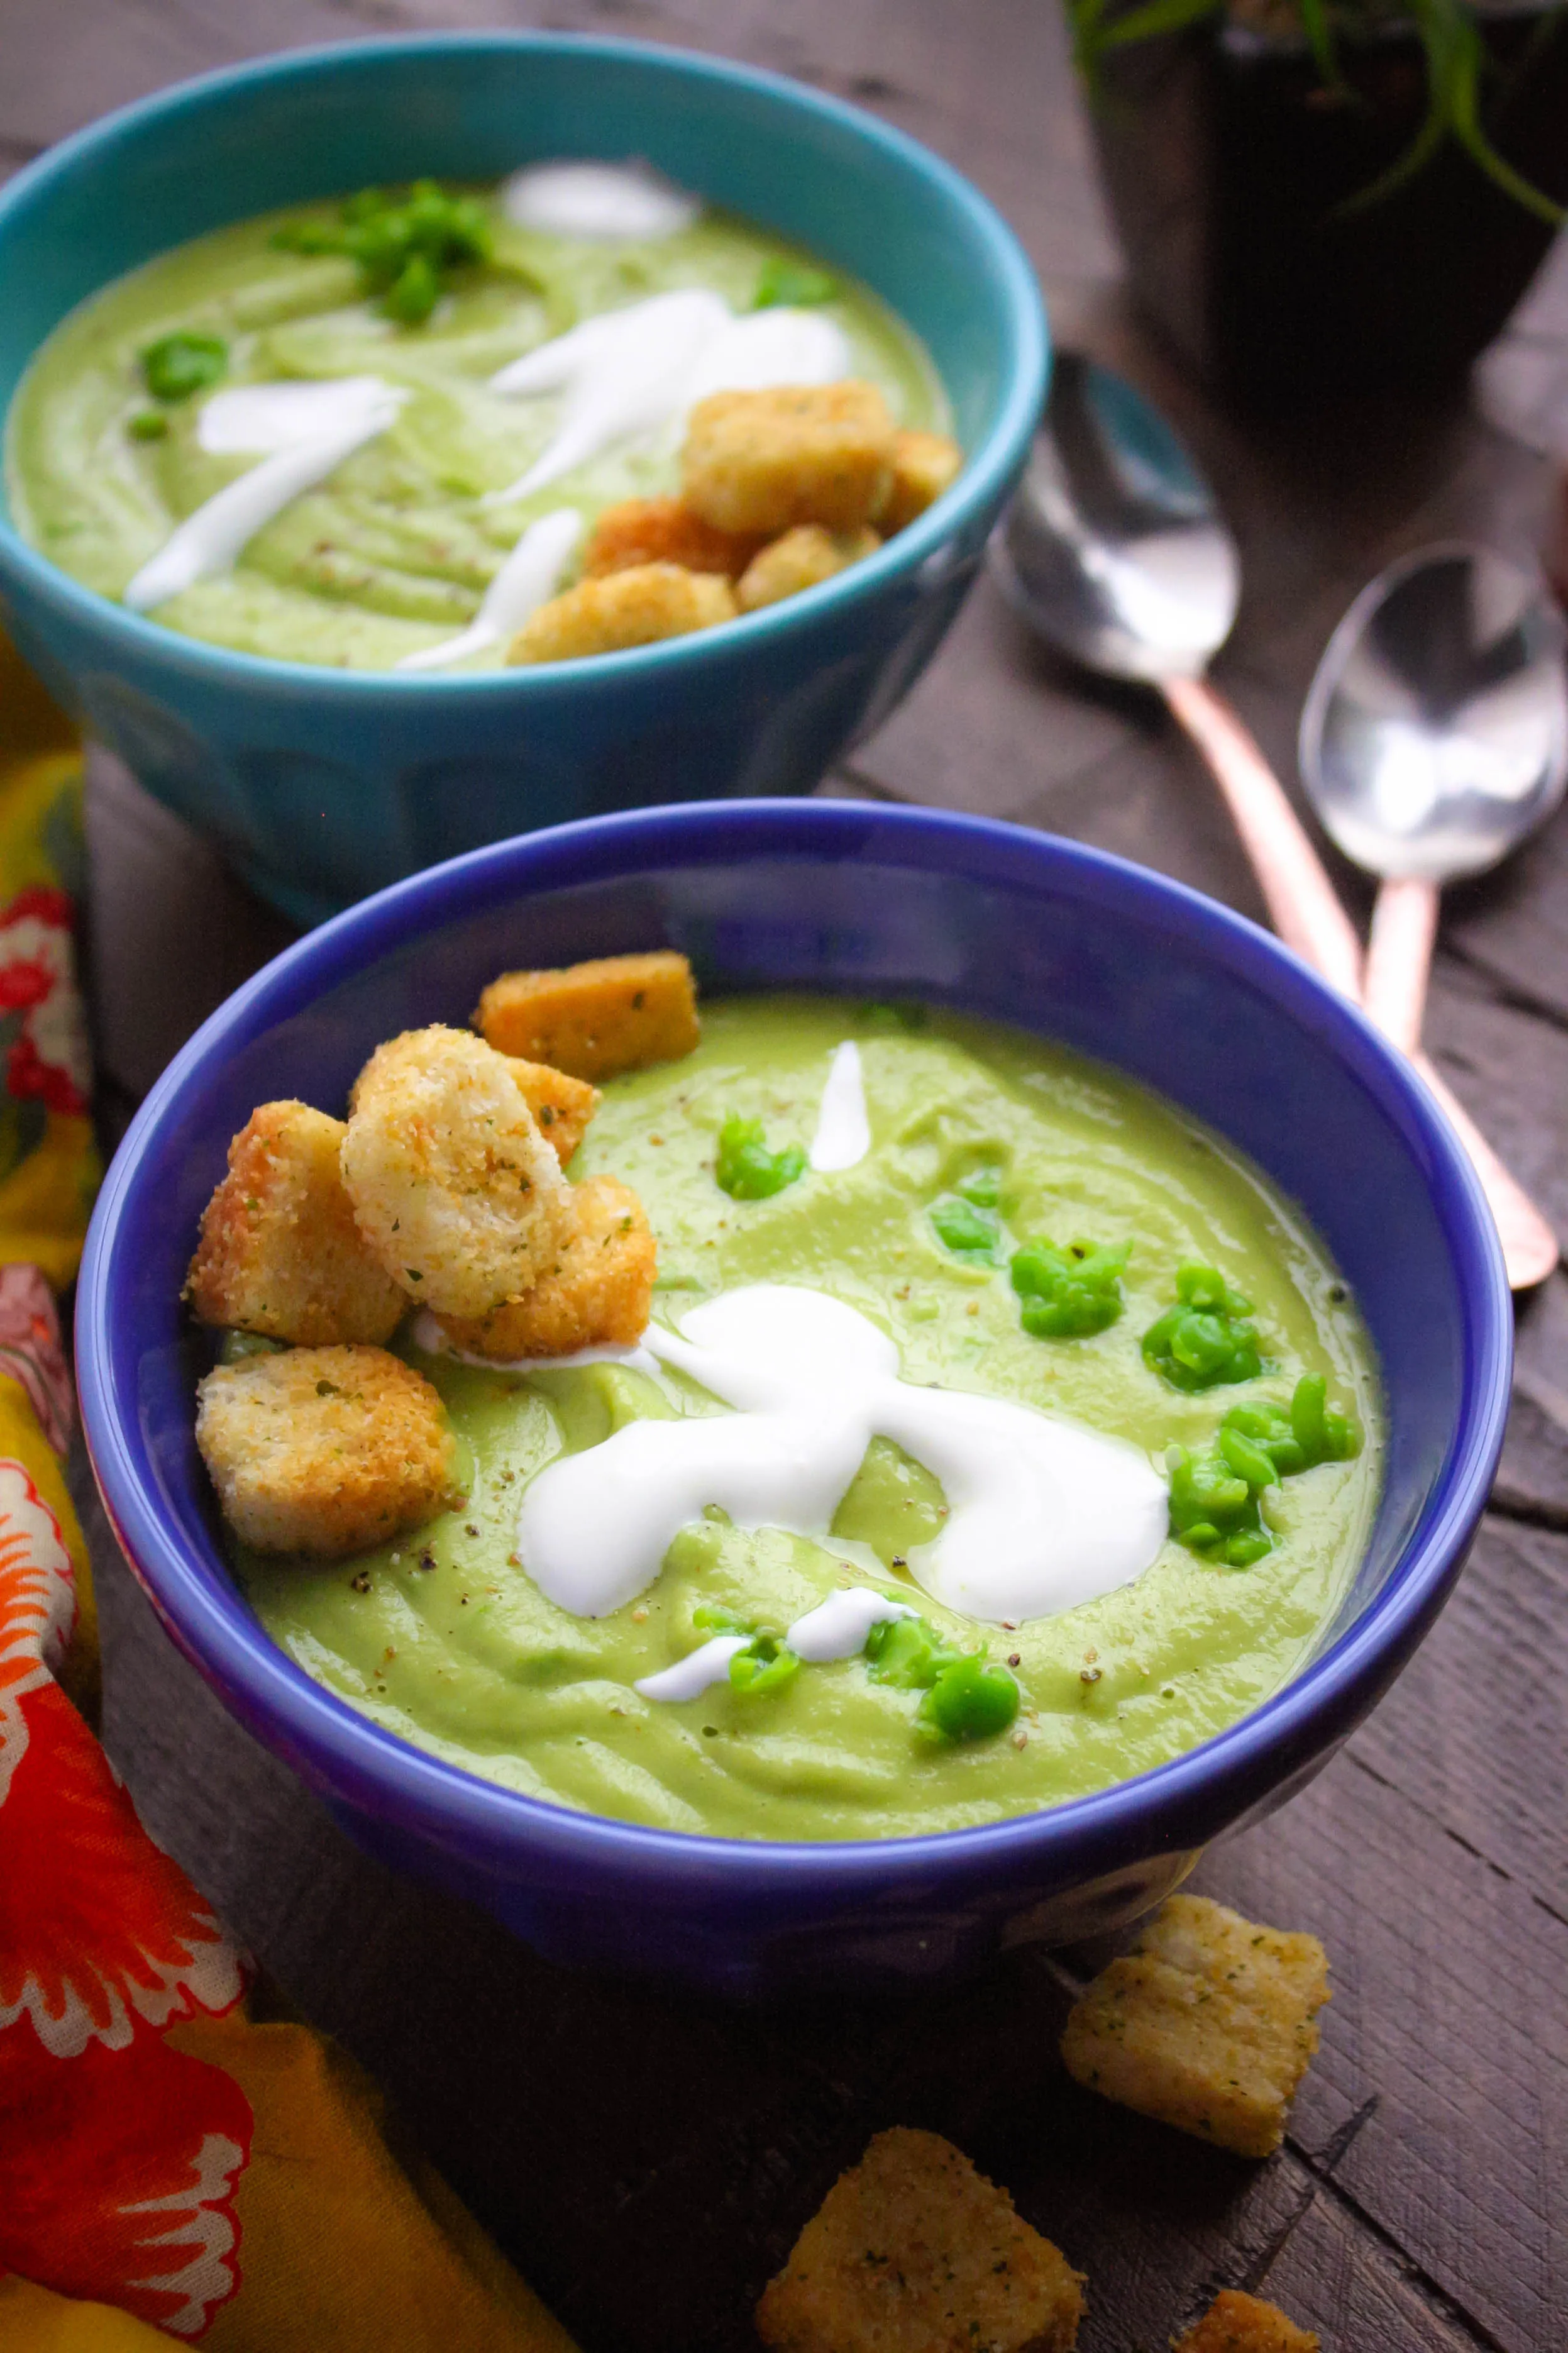 Warm Avocado and Pea Soup is like a bowl of springtime! Warm Avocado and Pea Soup is bold in color and so tasty, too!